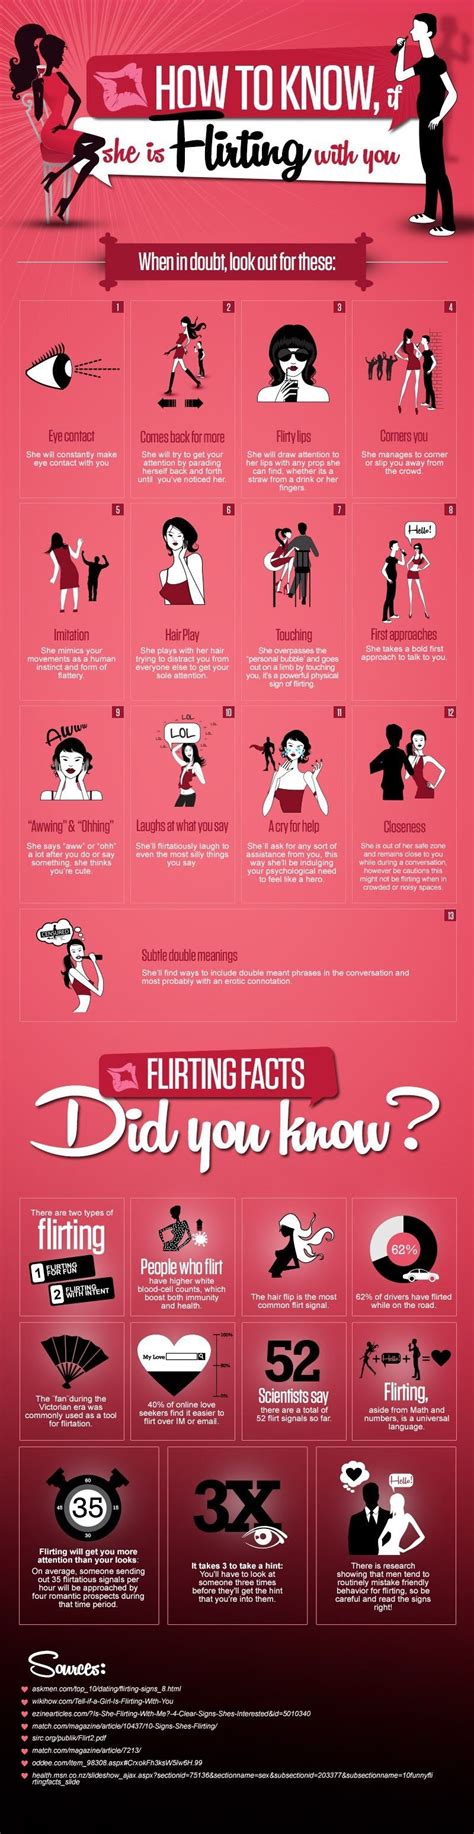 13 Signs If She Is Flirting With You Infographic Flirting How To